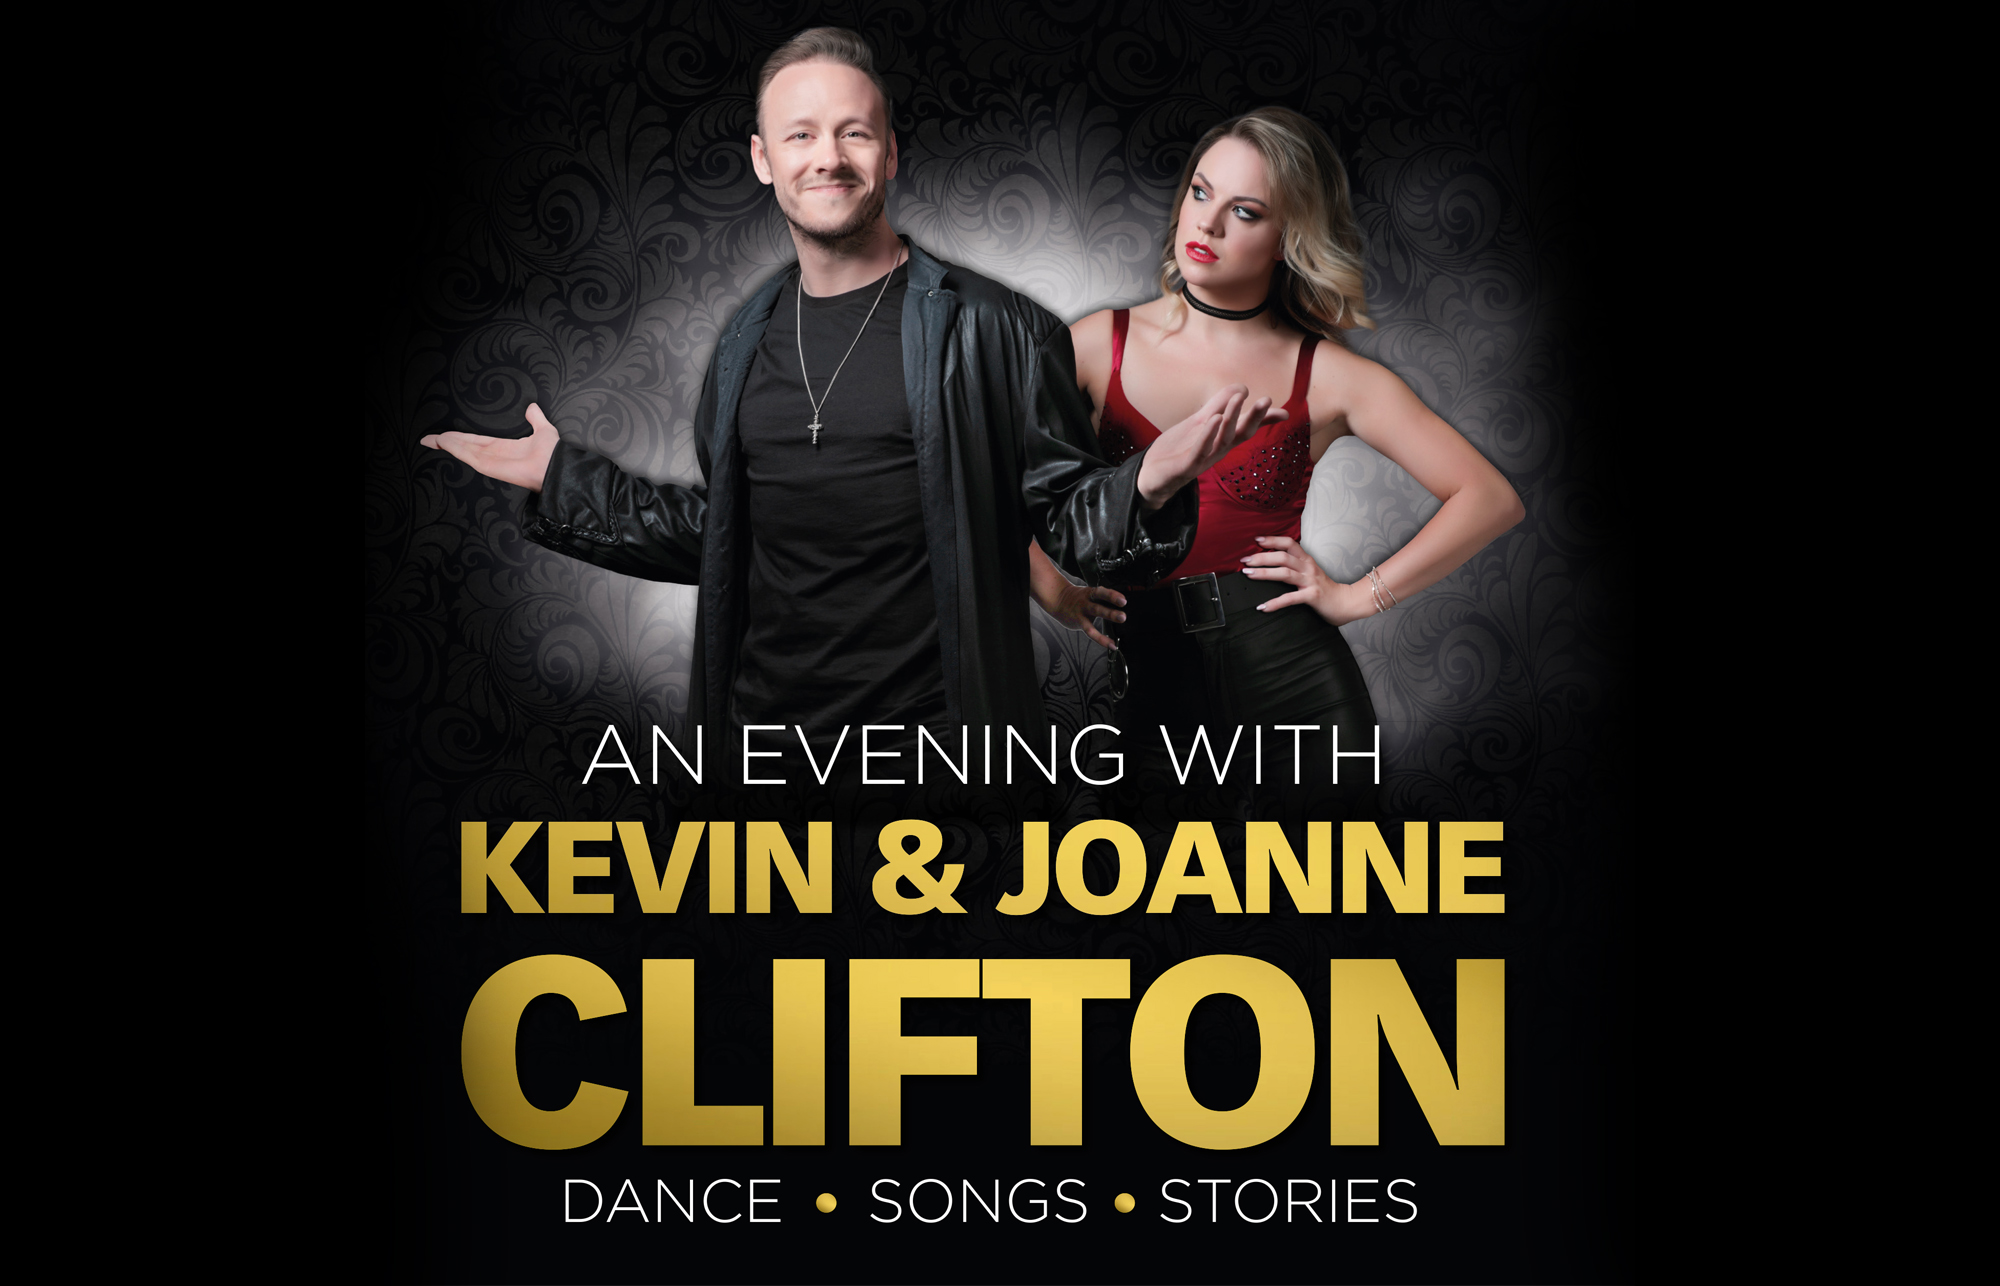 Promotional artwork for An Evening with Kevin and Joanne Clifton. Kevin Clifton smiles in a black outfit, arms outstretched and palms up, as Joanne - wearing a red corset top and black trousers - looks at him. She is standing behind Kevin, with her hands on her hips.